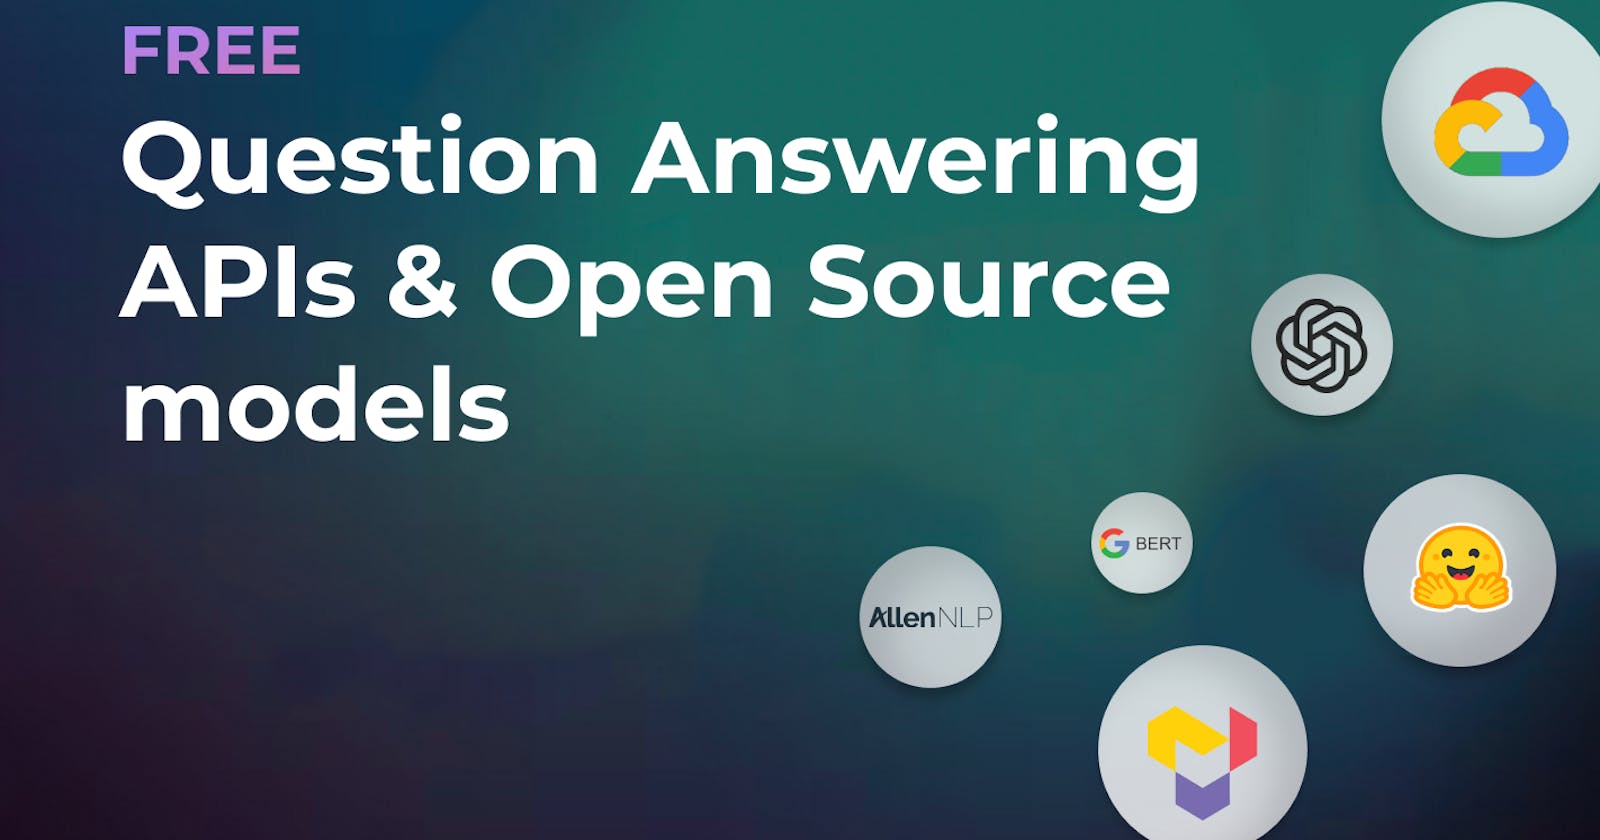 Top Free Q&A tools, APIs, and Open Source models